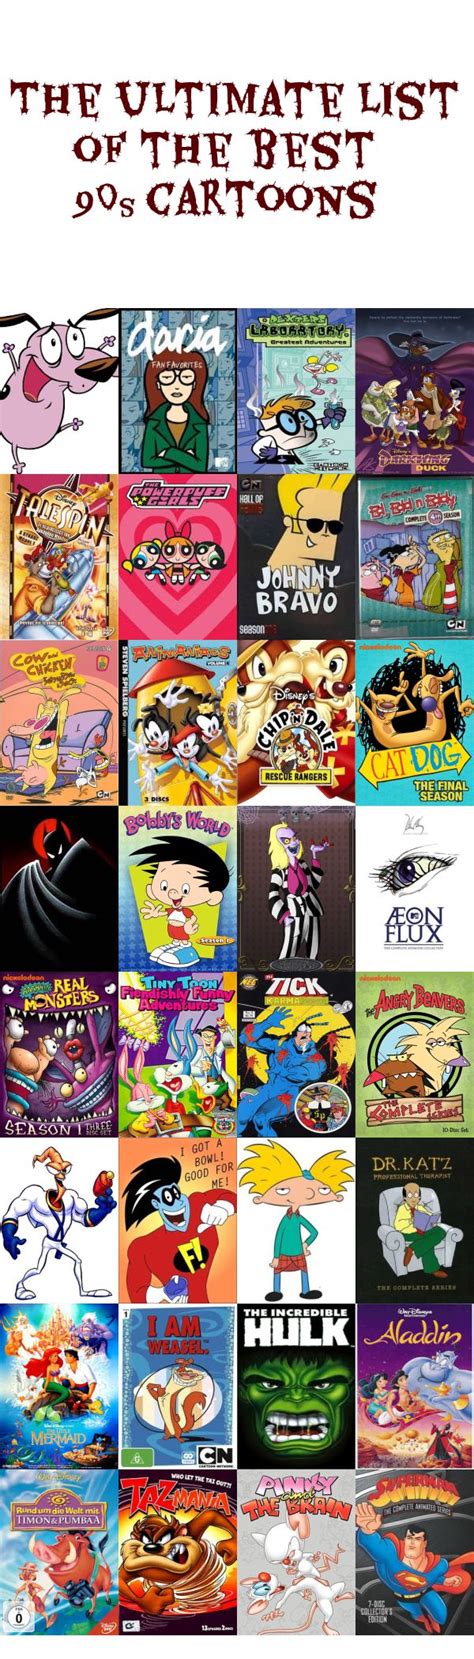 The Ultimate List Of The Best 90s Cartoons Best 90s